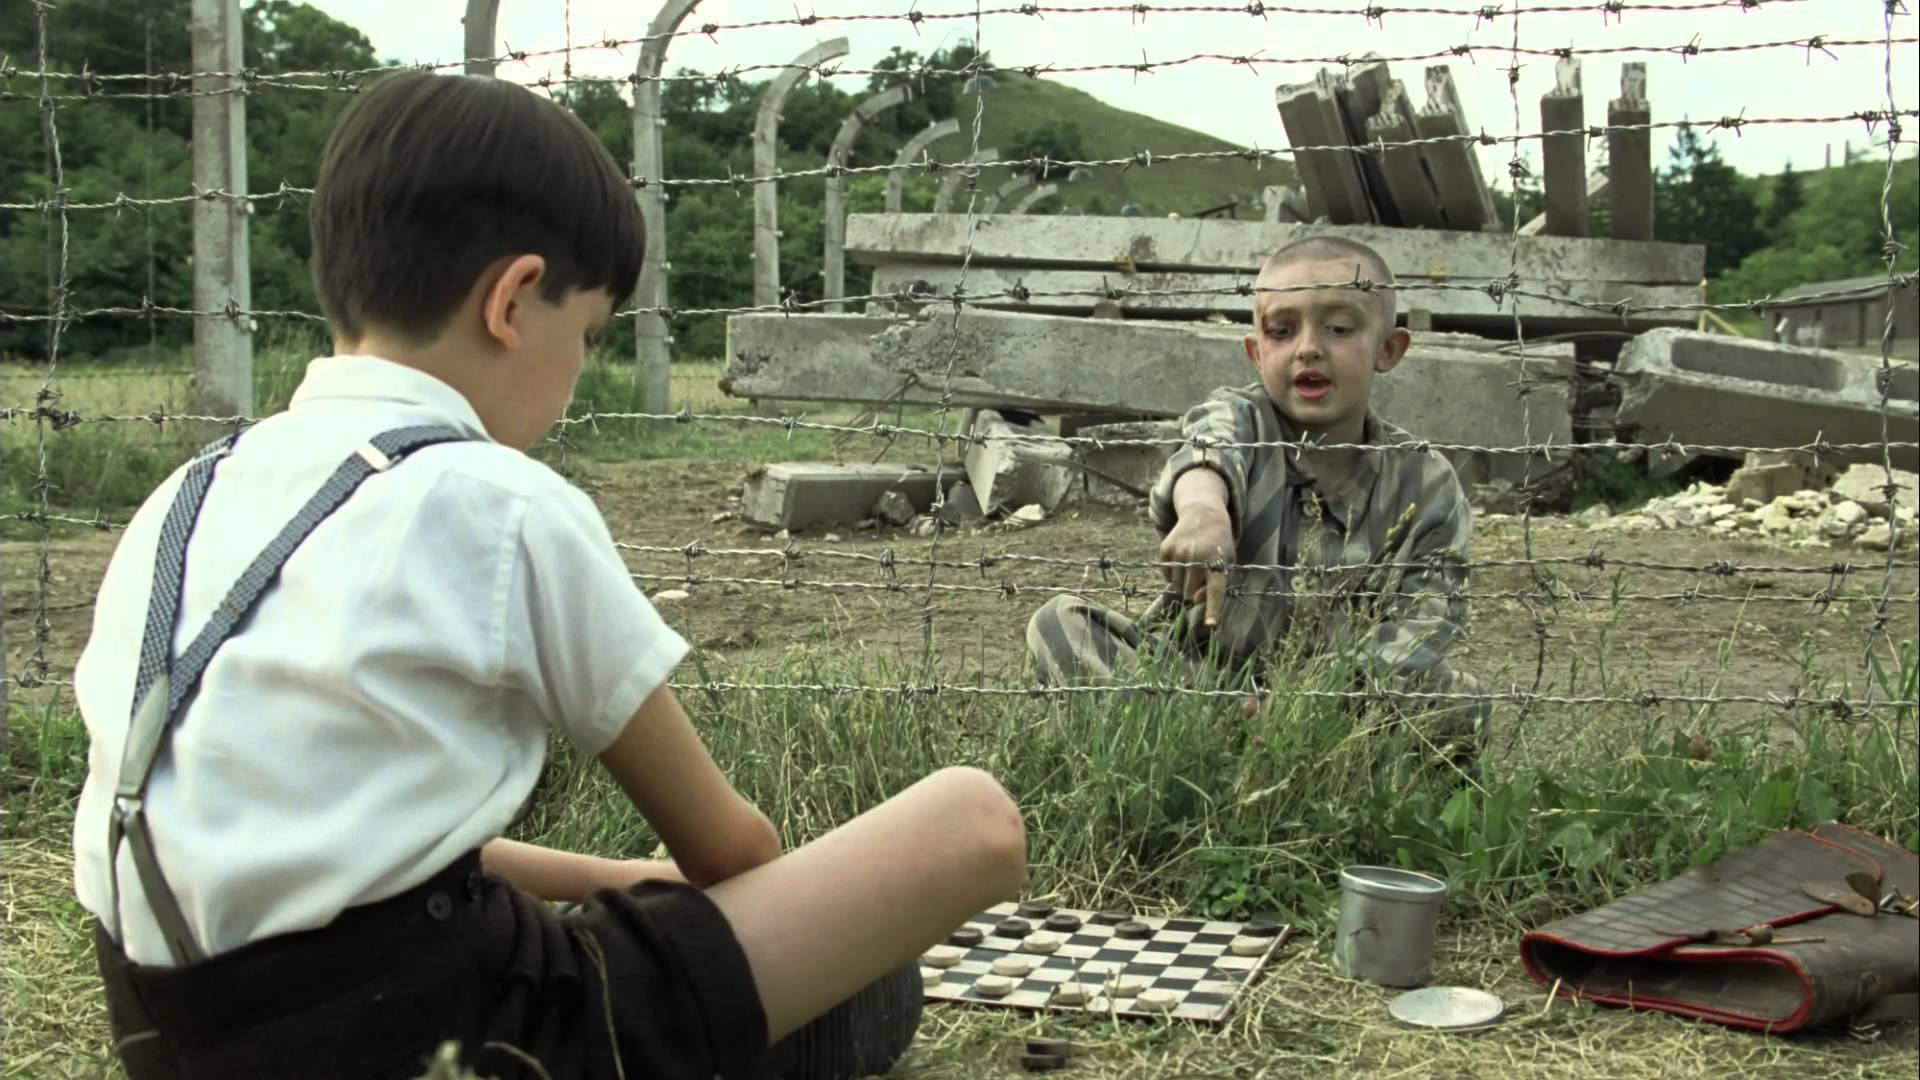 REVIEW: “The Boy in the Striped Pajamas”